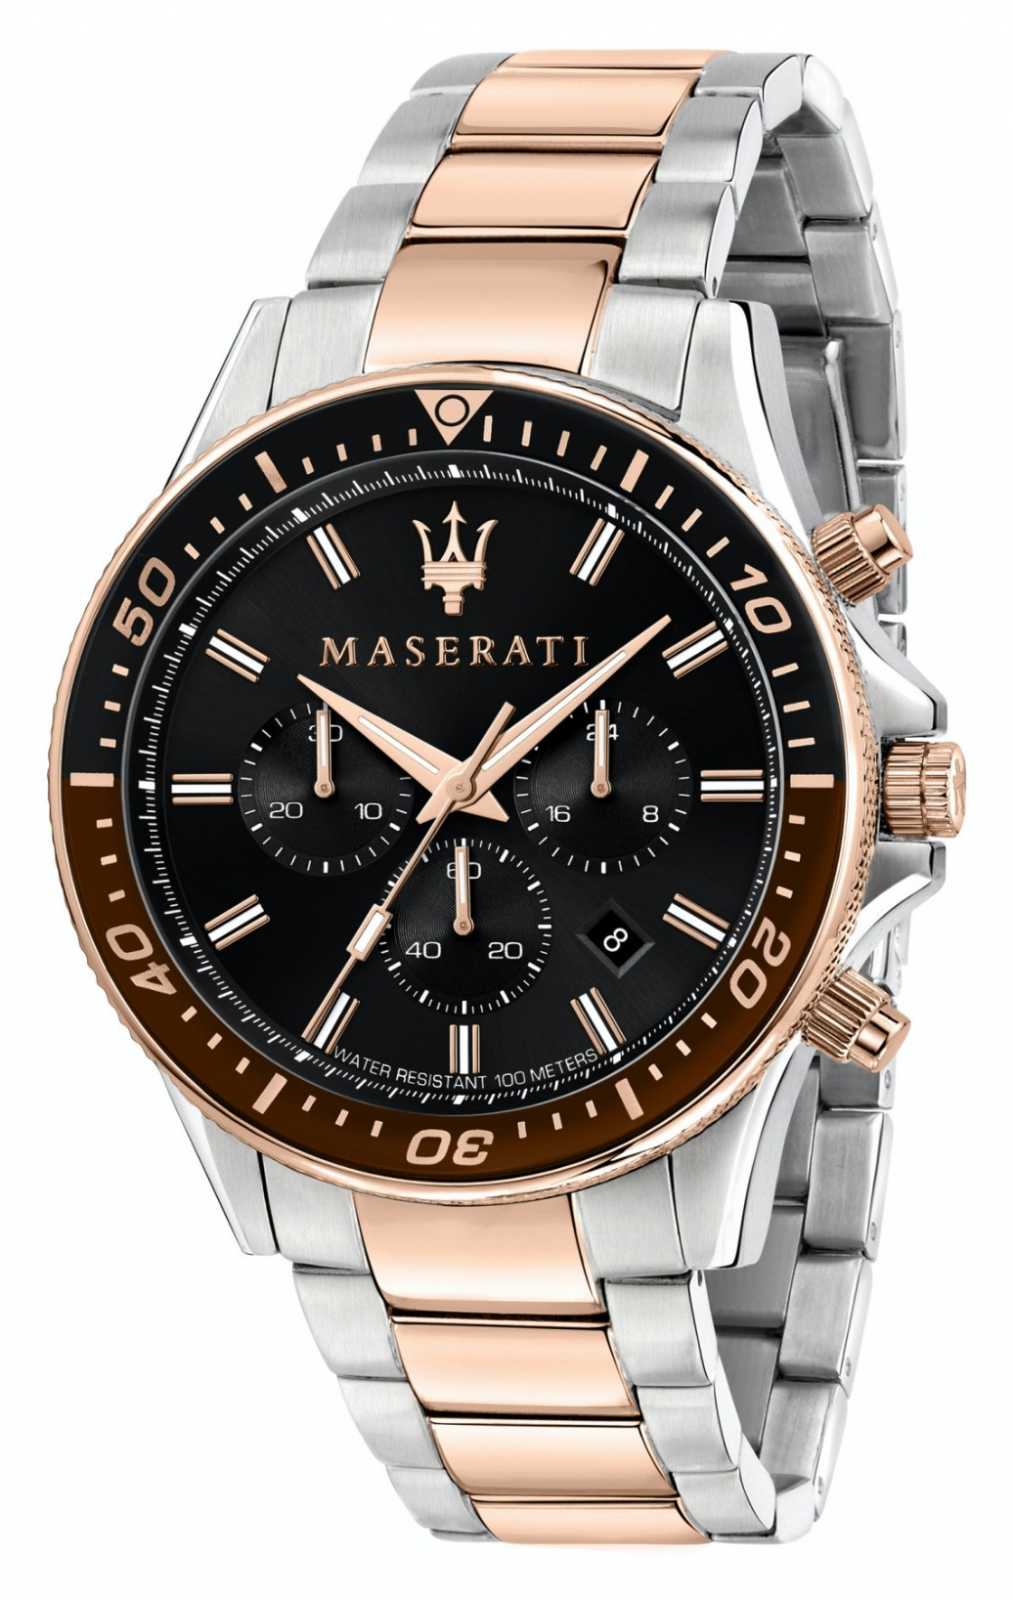 See What's New from Maserati Watches on AccuWeather Shop